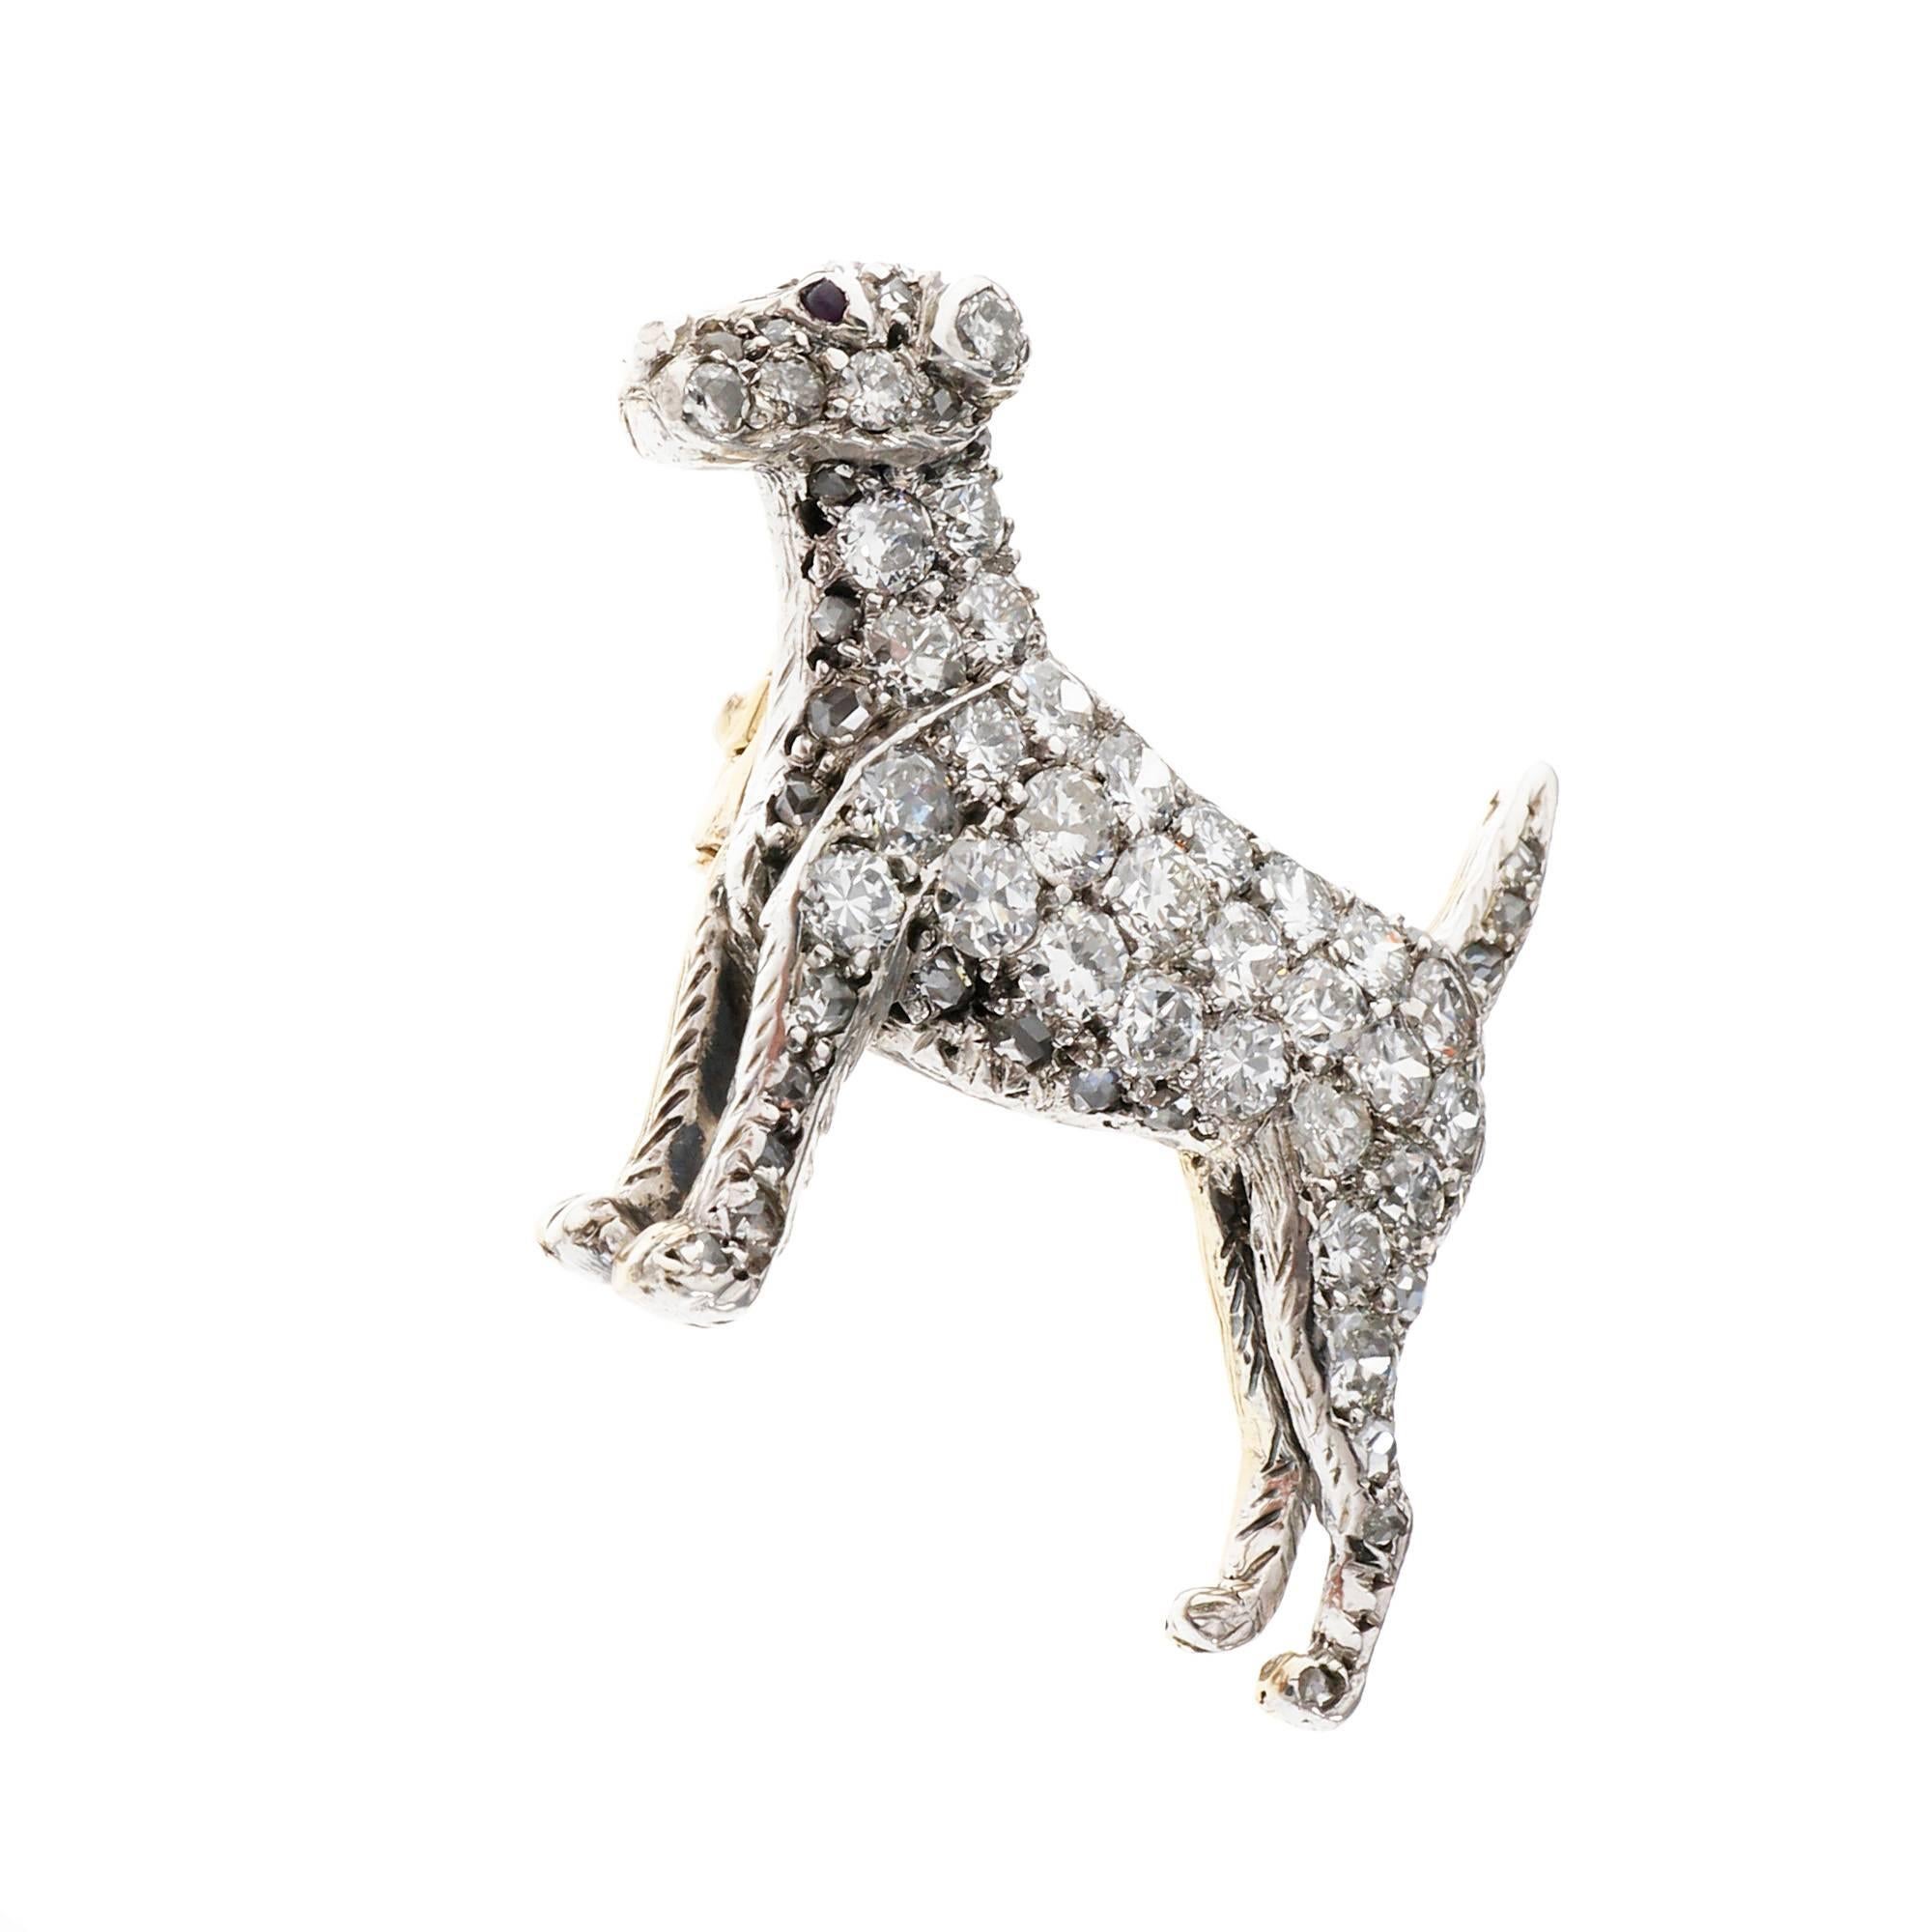 1930's Art Deco Pave Diamond Ruby gold pointer dog brooch. This unique brooch features a stunning 31 round cut diamonds totaling 1.24 carat's in a pave setting, radiating brilliance from every angle. A vibrant red cabochon ruby add a pop of color